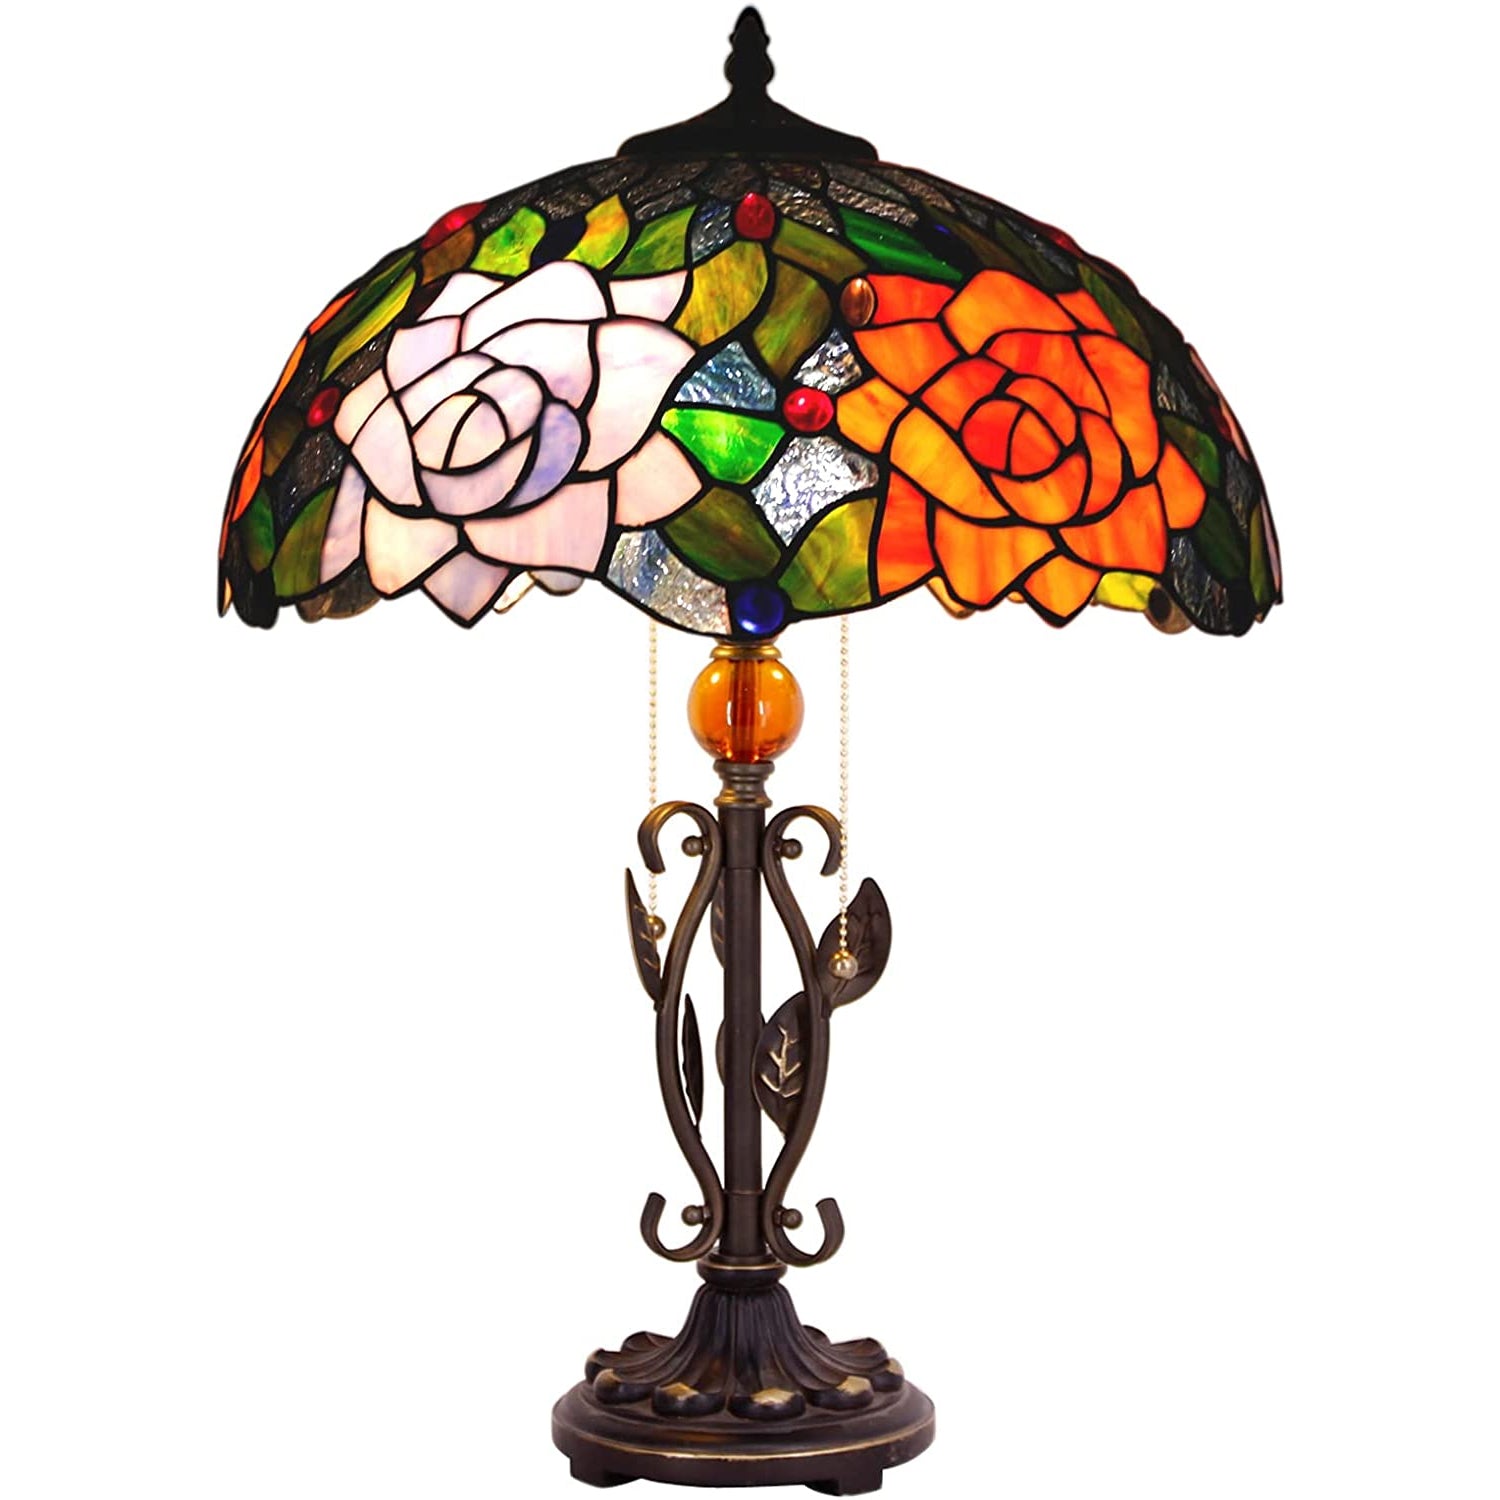 Tiffany Table Lamp Rose Stained Glass Desk Light W16H24 Inch with Iron Metal Leaves Style